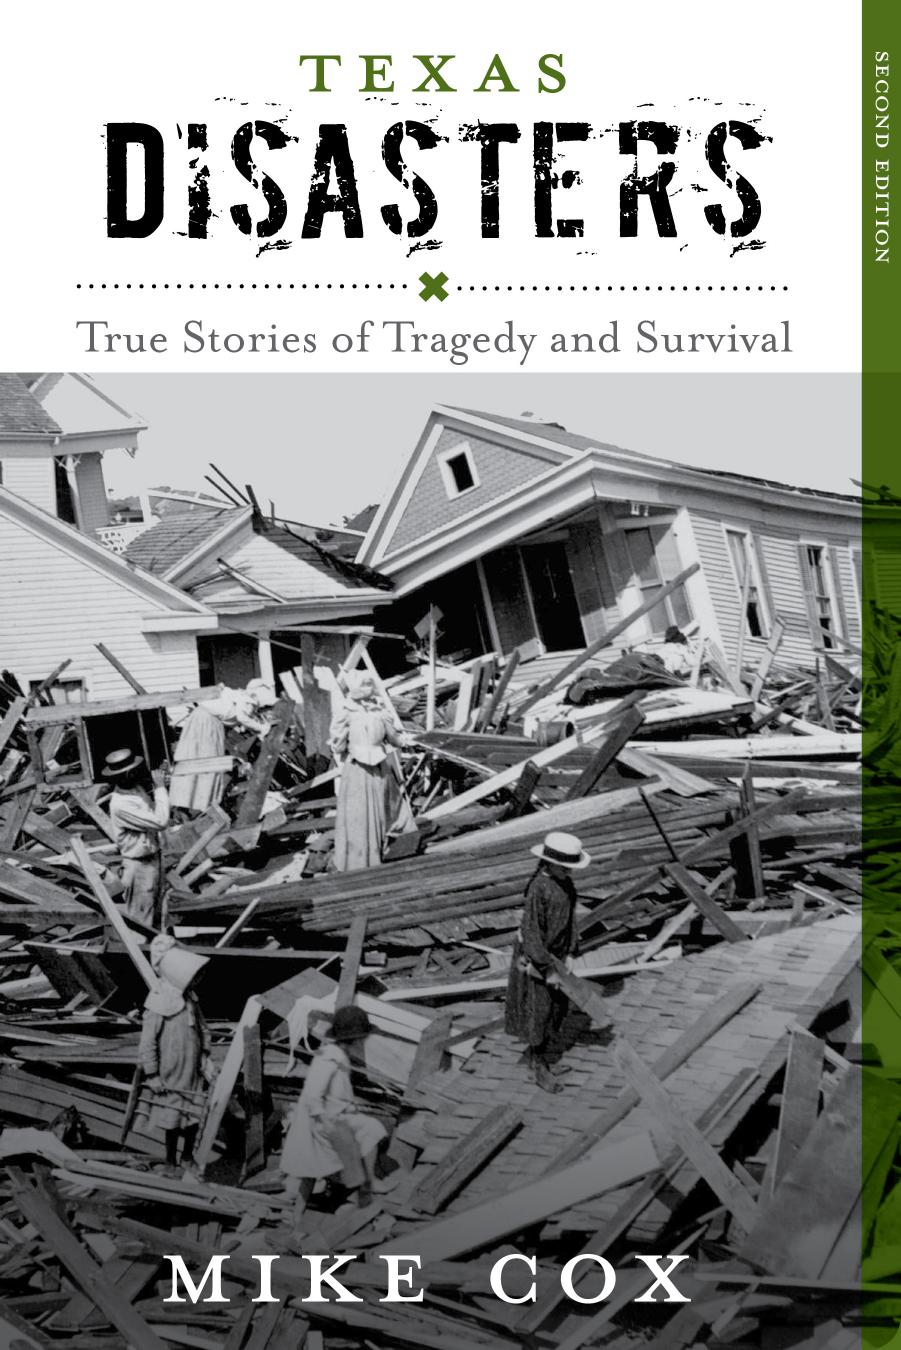 Texas Disasters: True Stories of Tragedy and Survival by Mike Cox